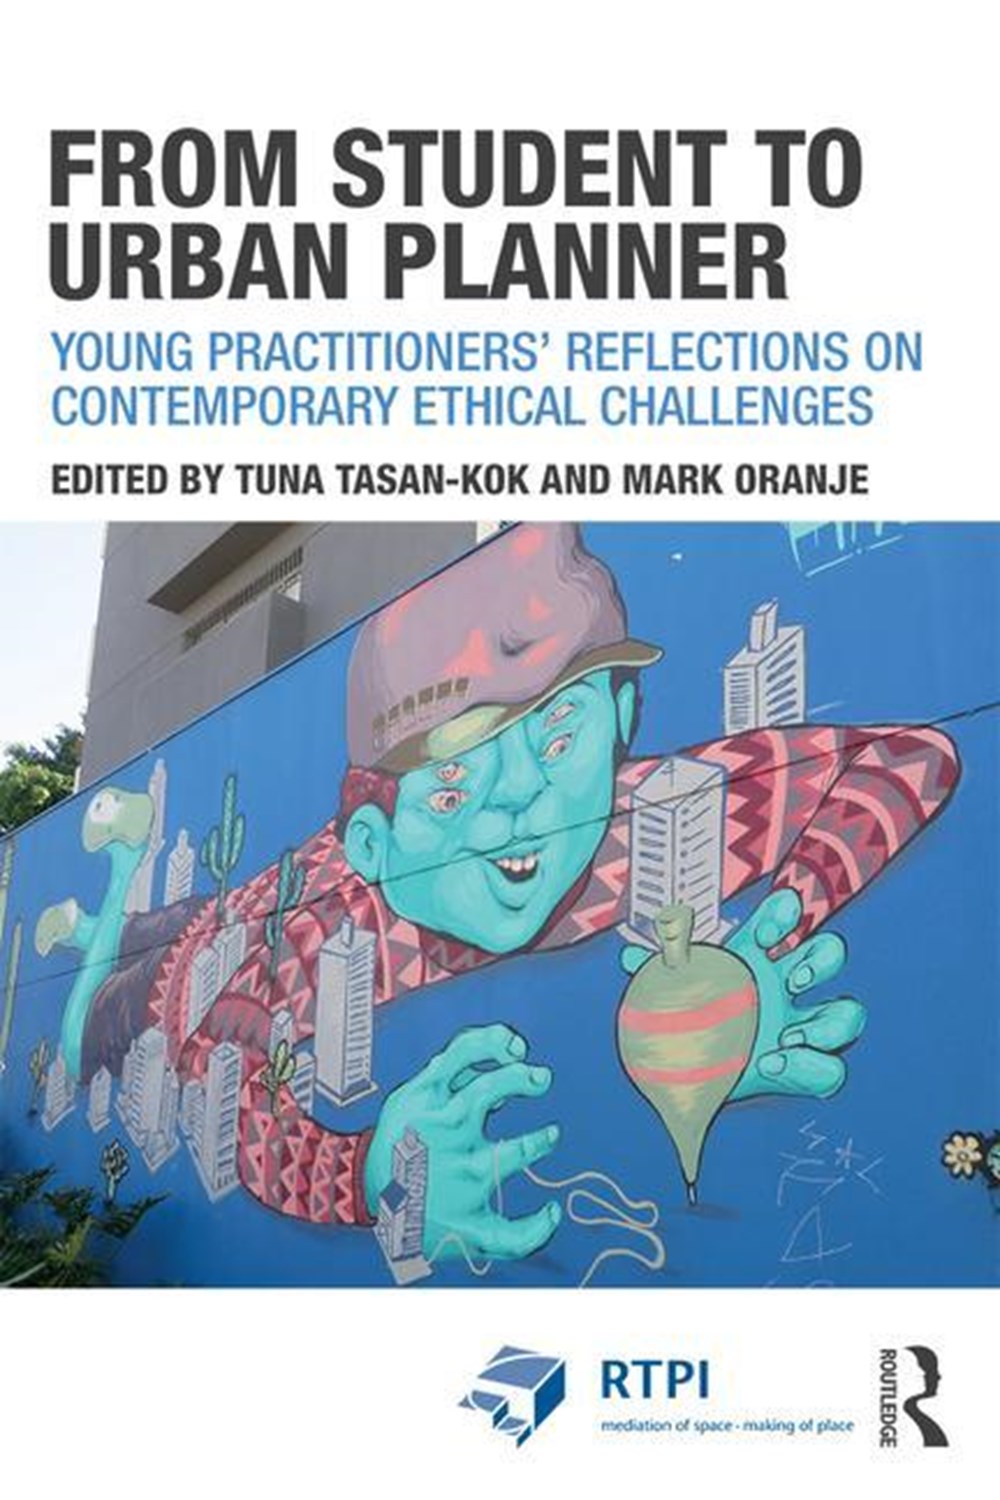 From Student to Urban Planner: Young Practitioners' Reflections on Contemporary Ethical Challenges